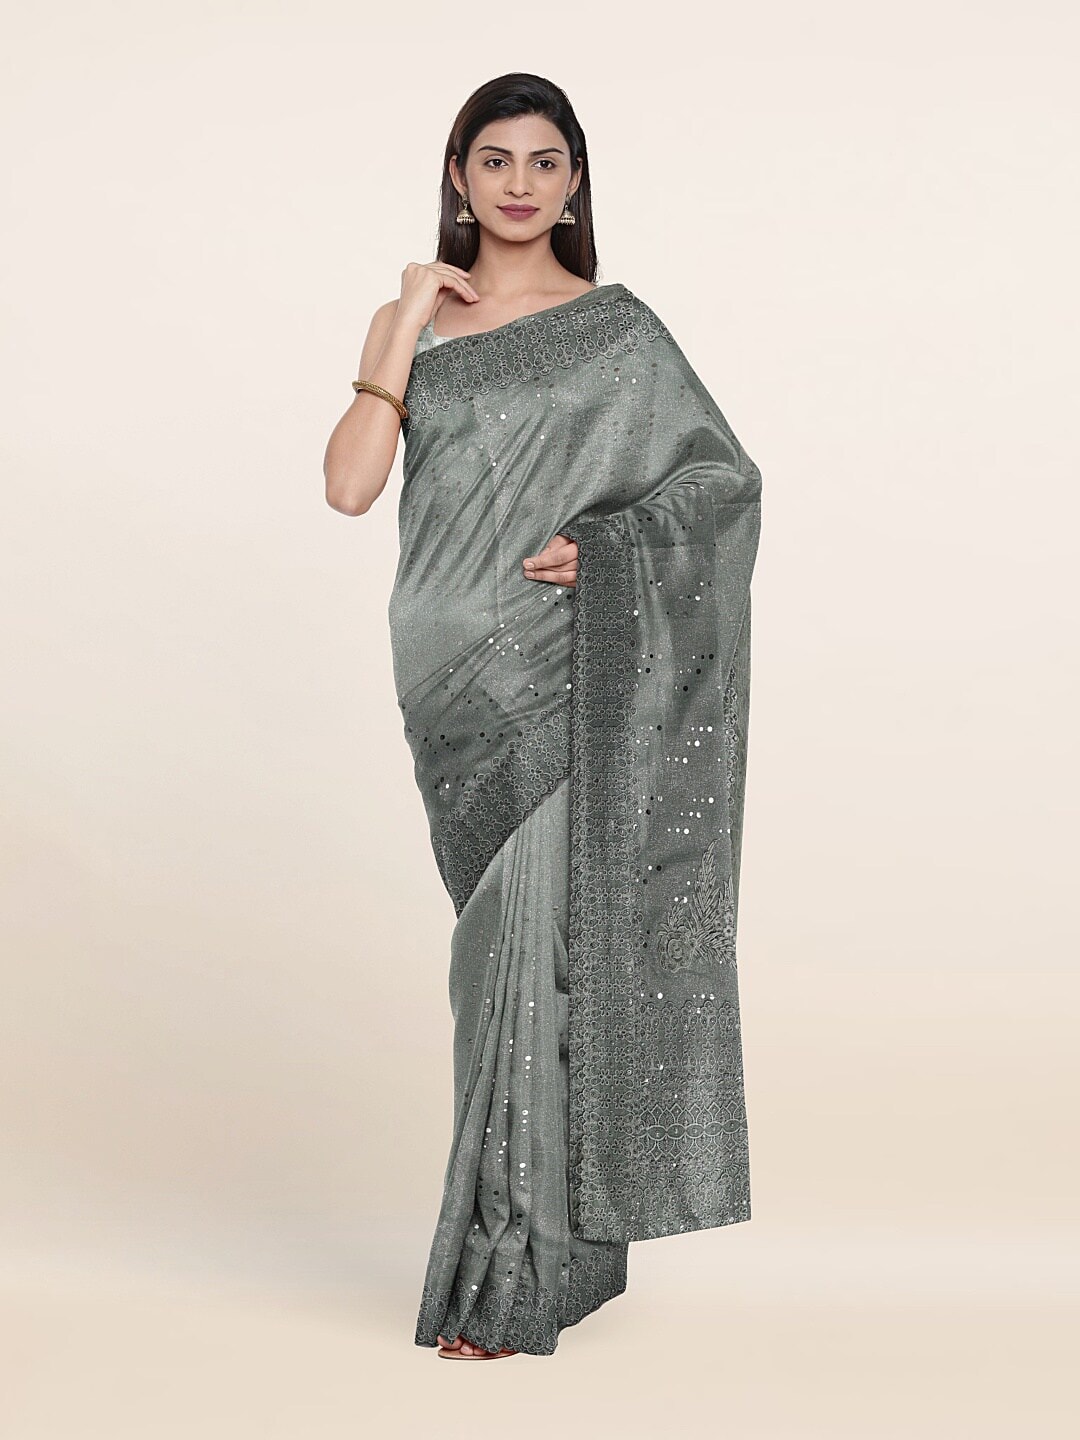 Pothys Green Embellished Beads and Stones Georgette Saree Price in India